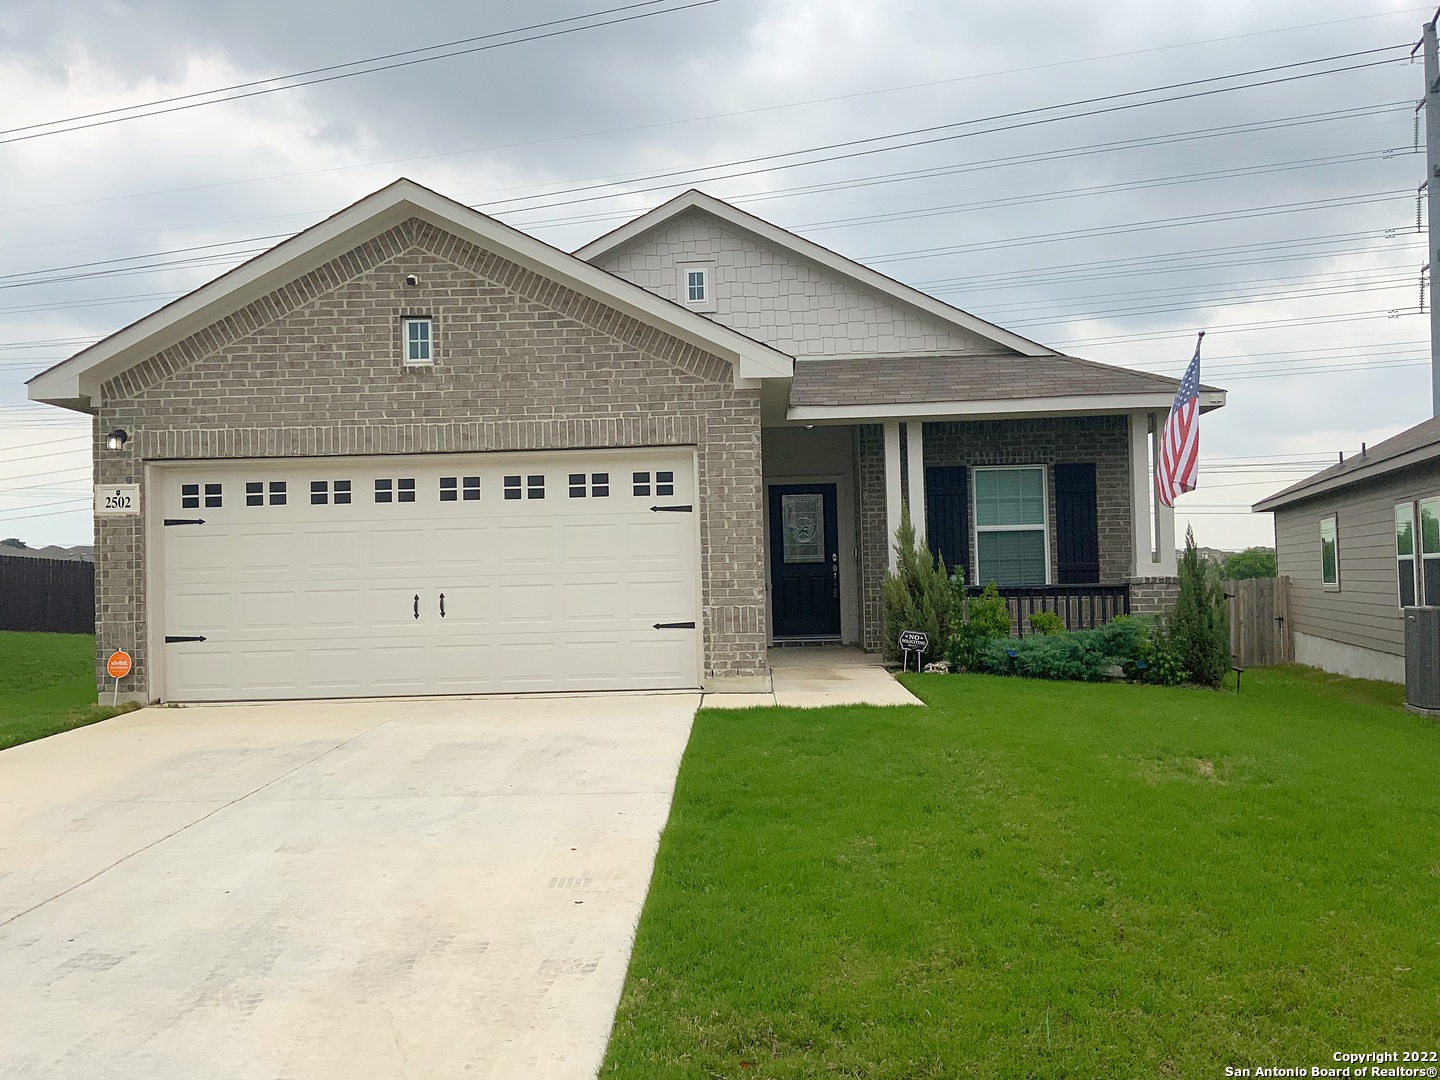 Beautiful well maintained home in the Laurel Mountain Ranch subdivision! Home has a large backyard, custom deck with built in fireplace! Easy access to 1604, Hwy 90 and IH 35! Seaworld and Fiesta Texas are a short drive away. Come see this amazing home and make it yours!